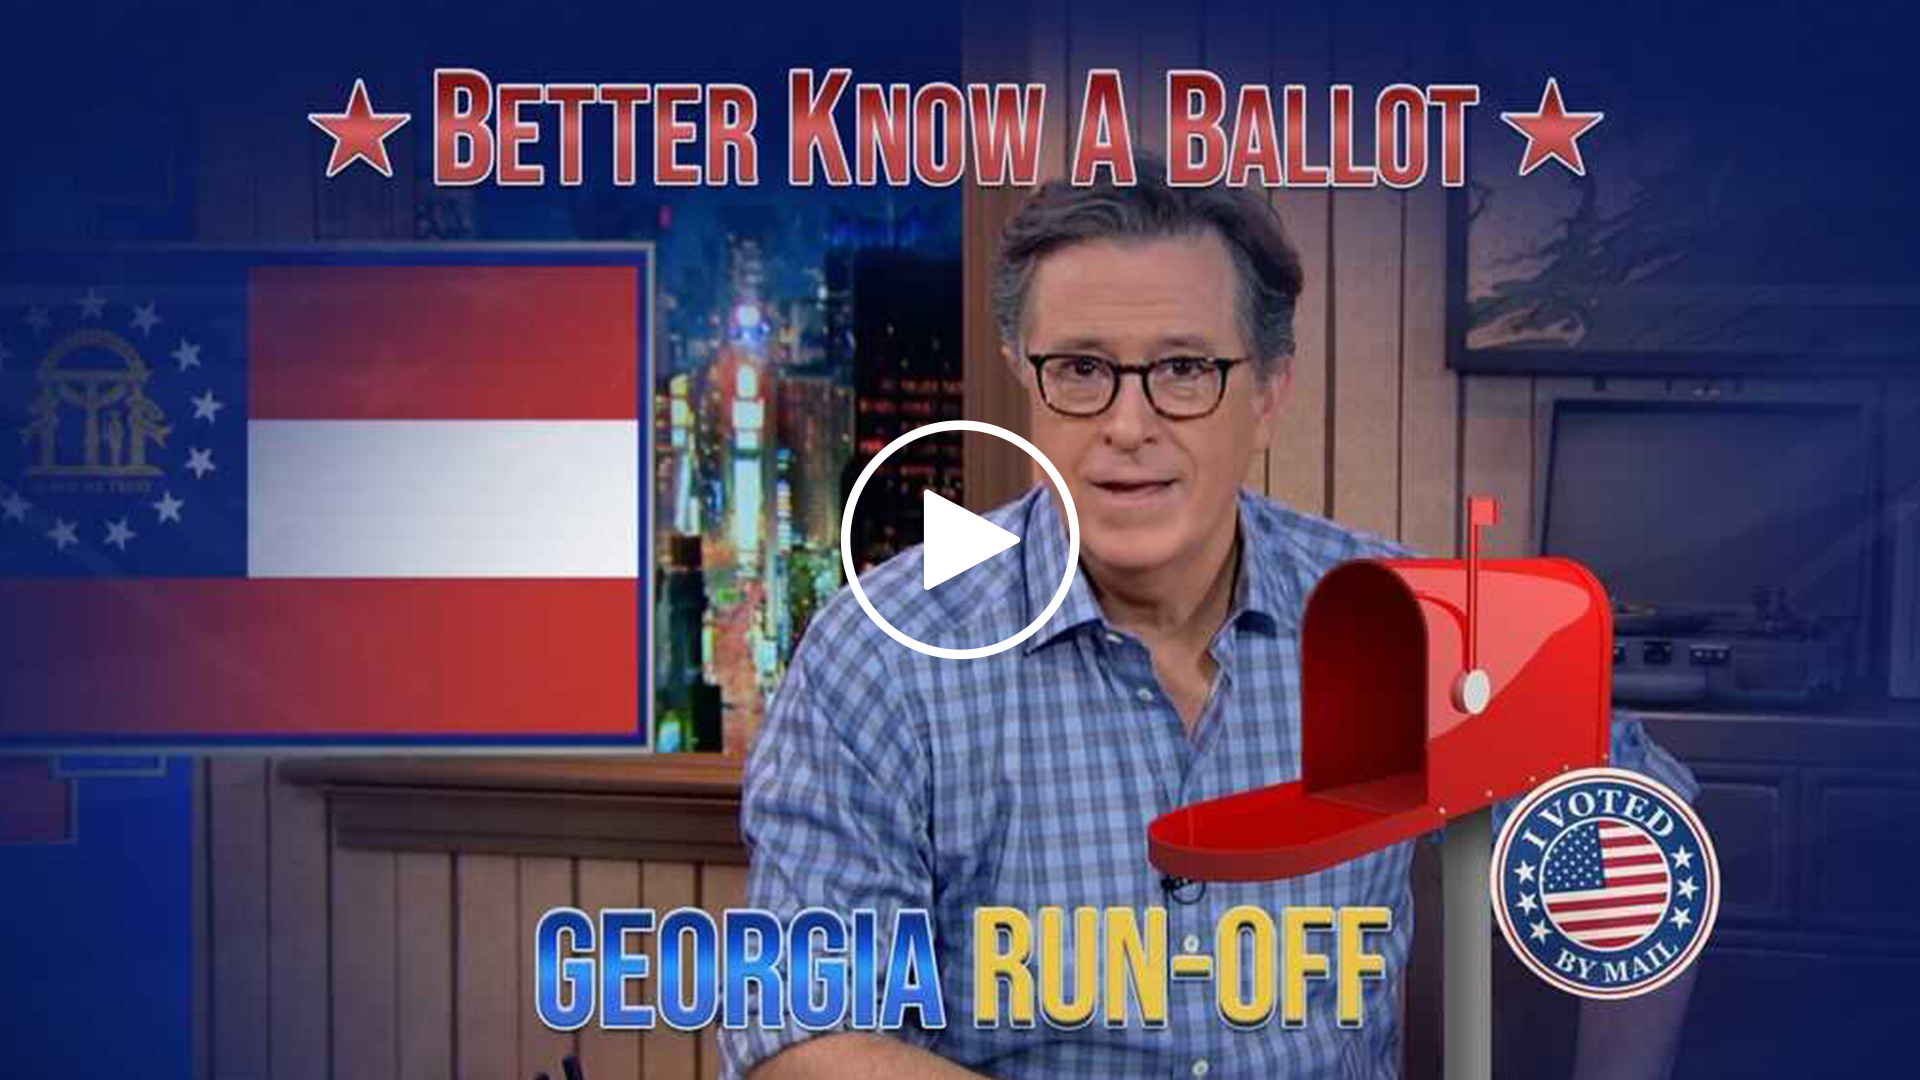 A MESSAGE FROM STEPHEN COLBERT